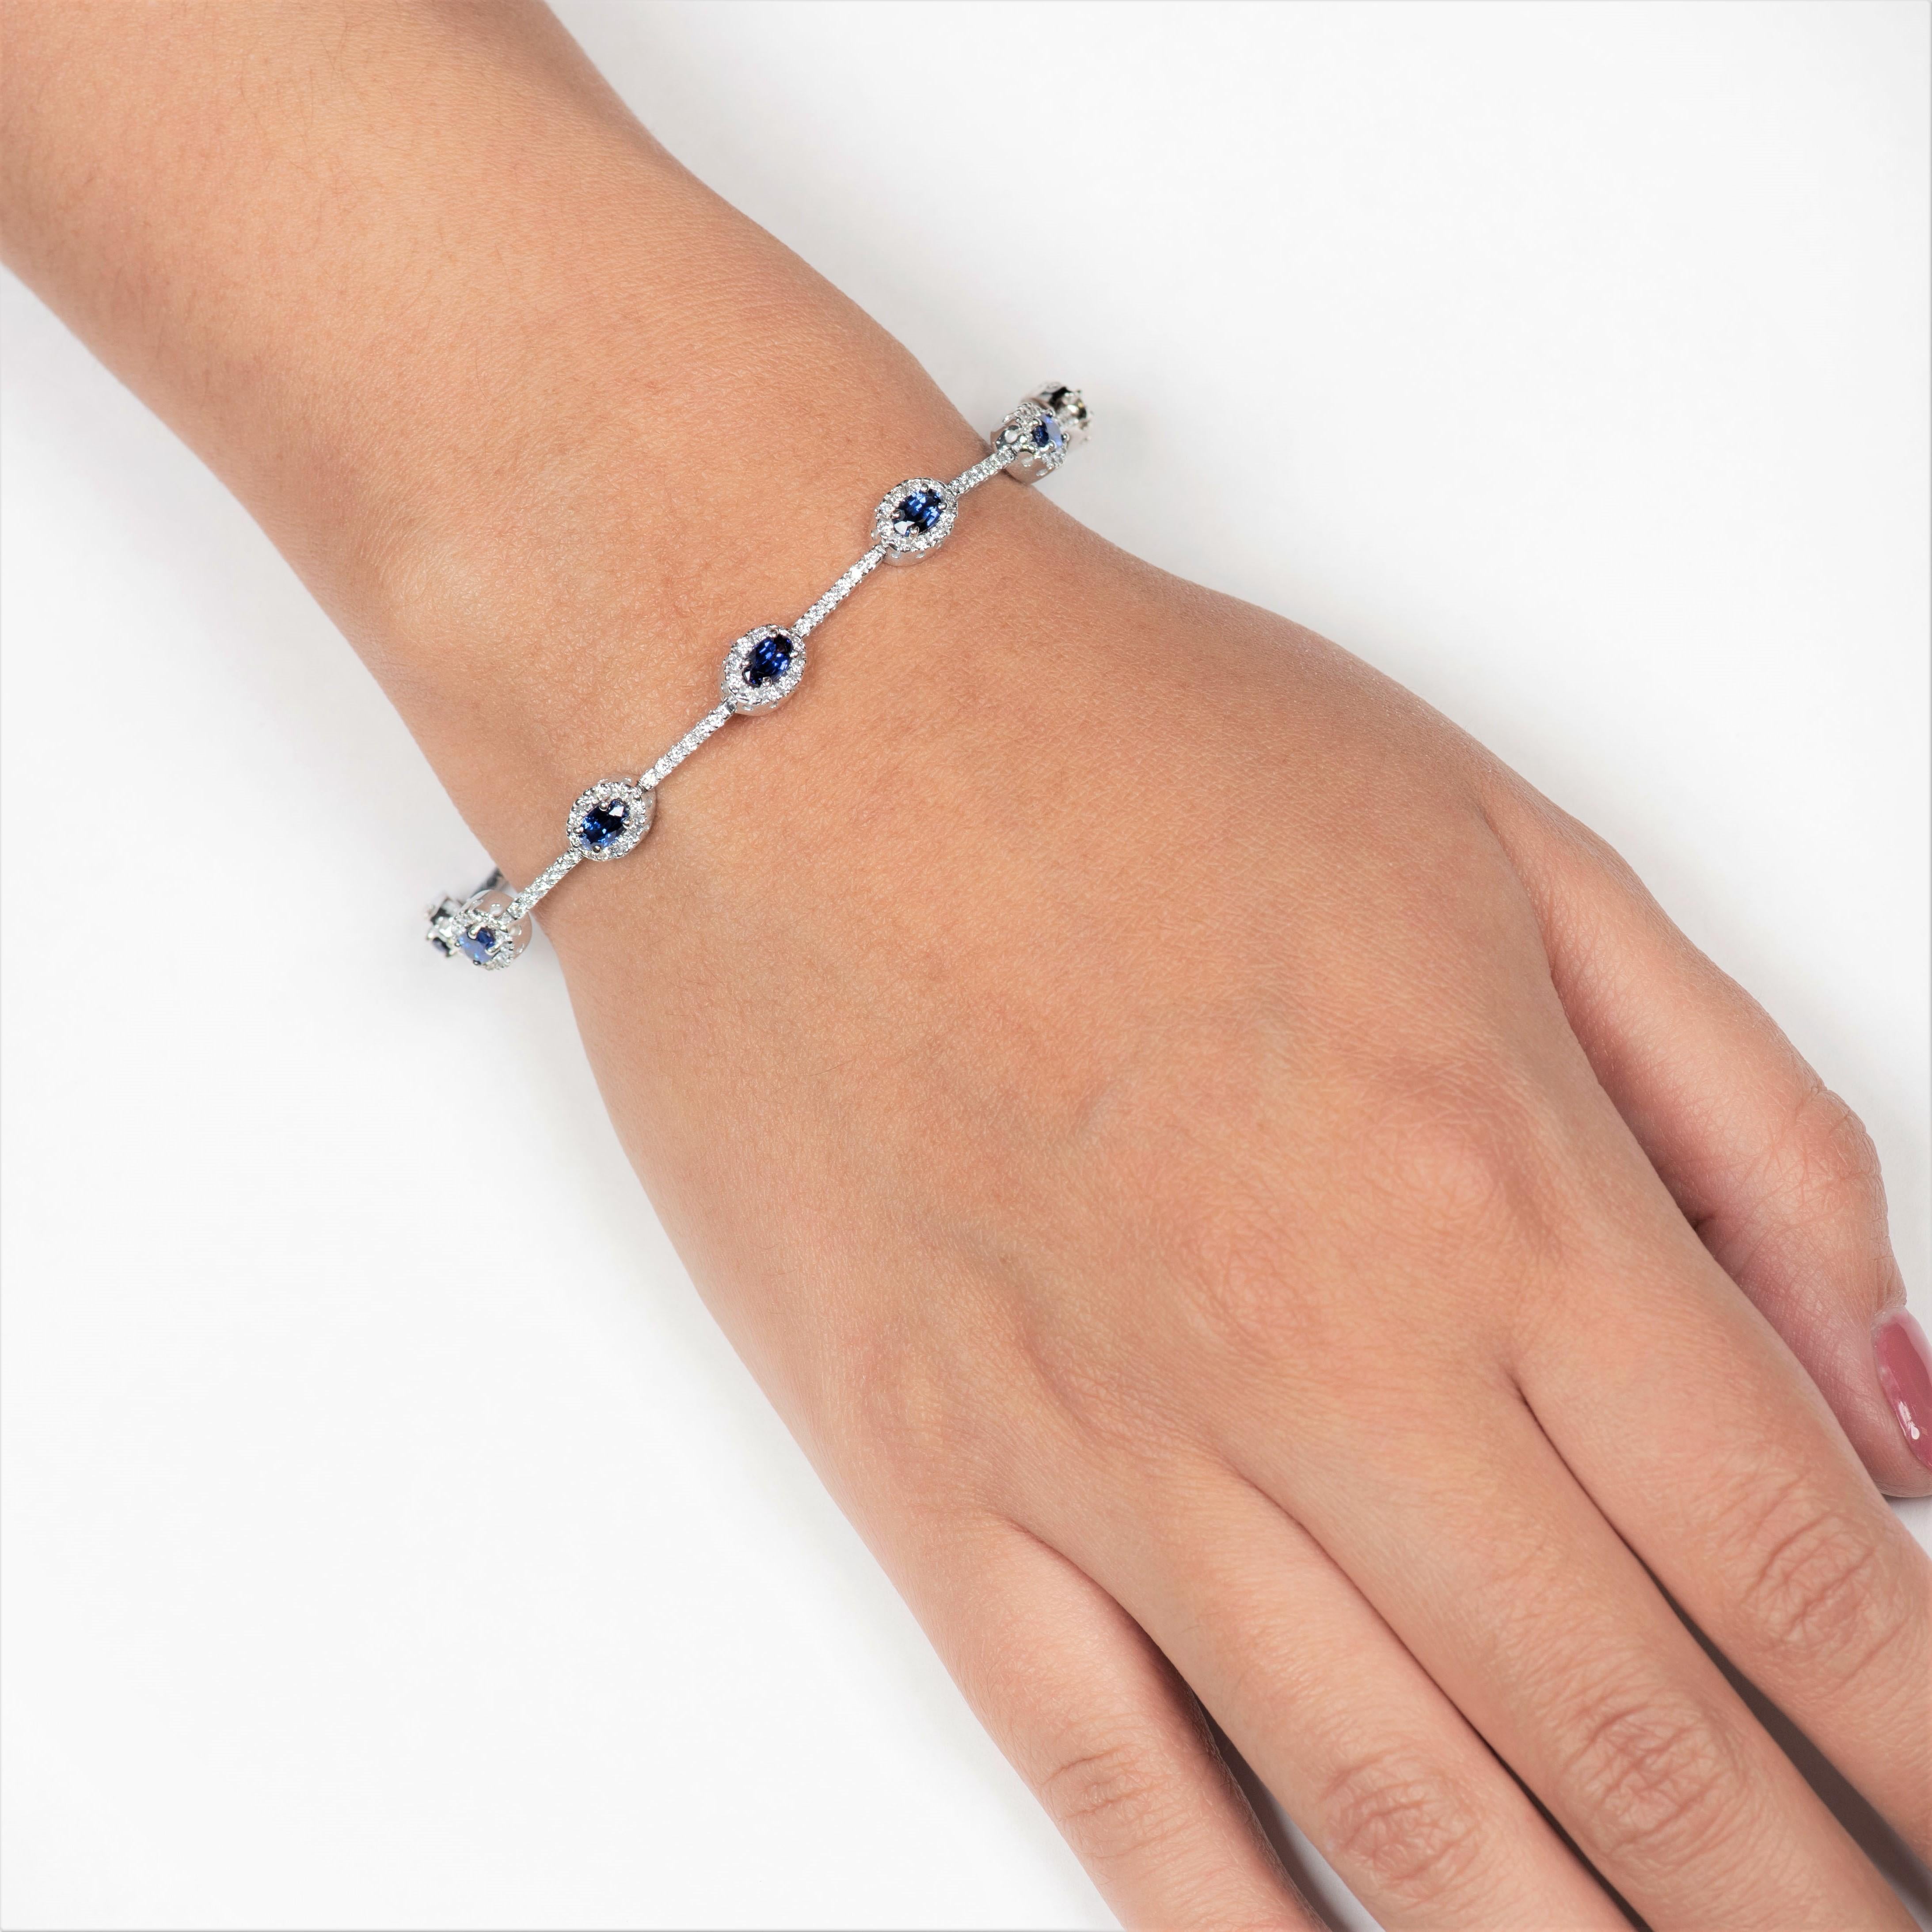 Alluring 2.32 Carats blue sapphire bracelet styled with 10 perfectly matched oval cut sapphires that are surrounded by 1.37 carats of round diamonds (180 diamonds).
The bracelet measures at a length of  7 inches and is designed in 14K white gold.